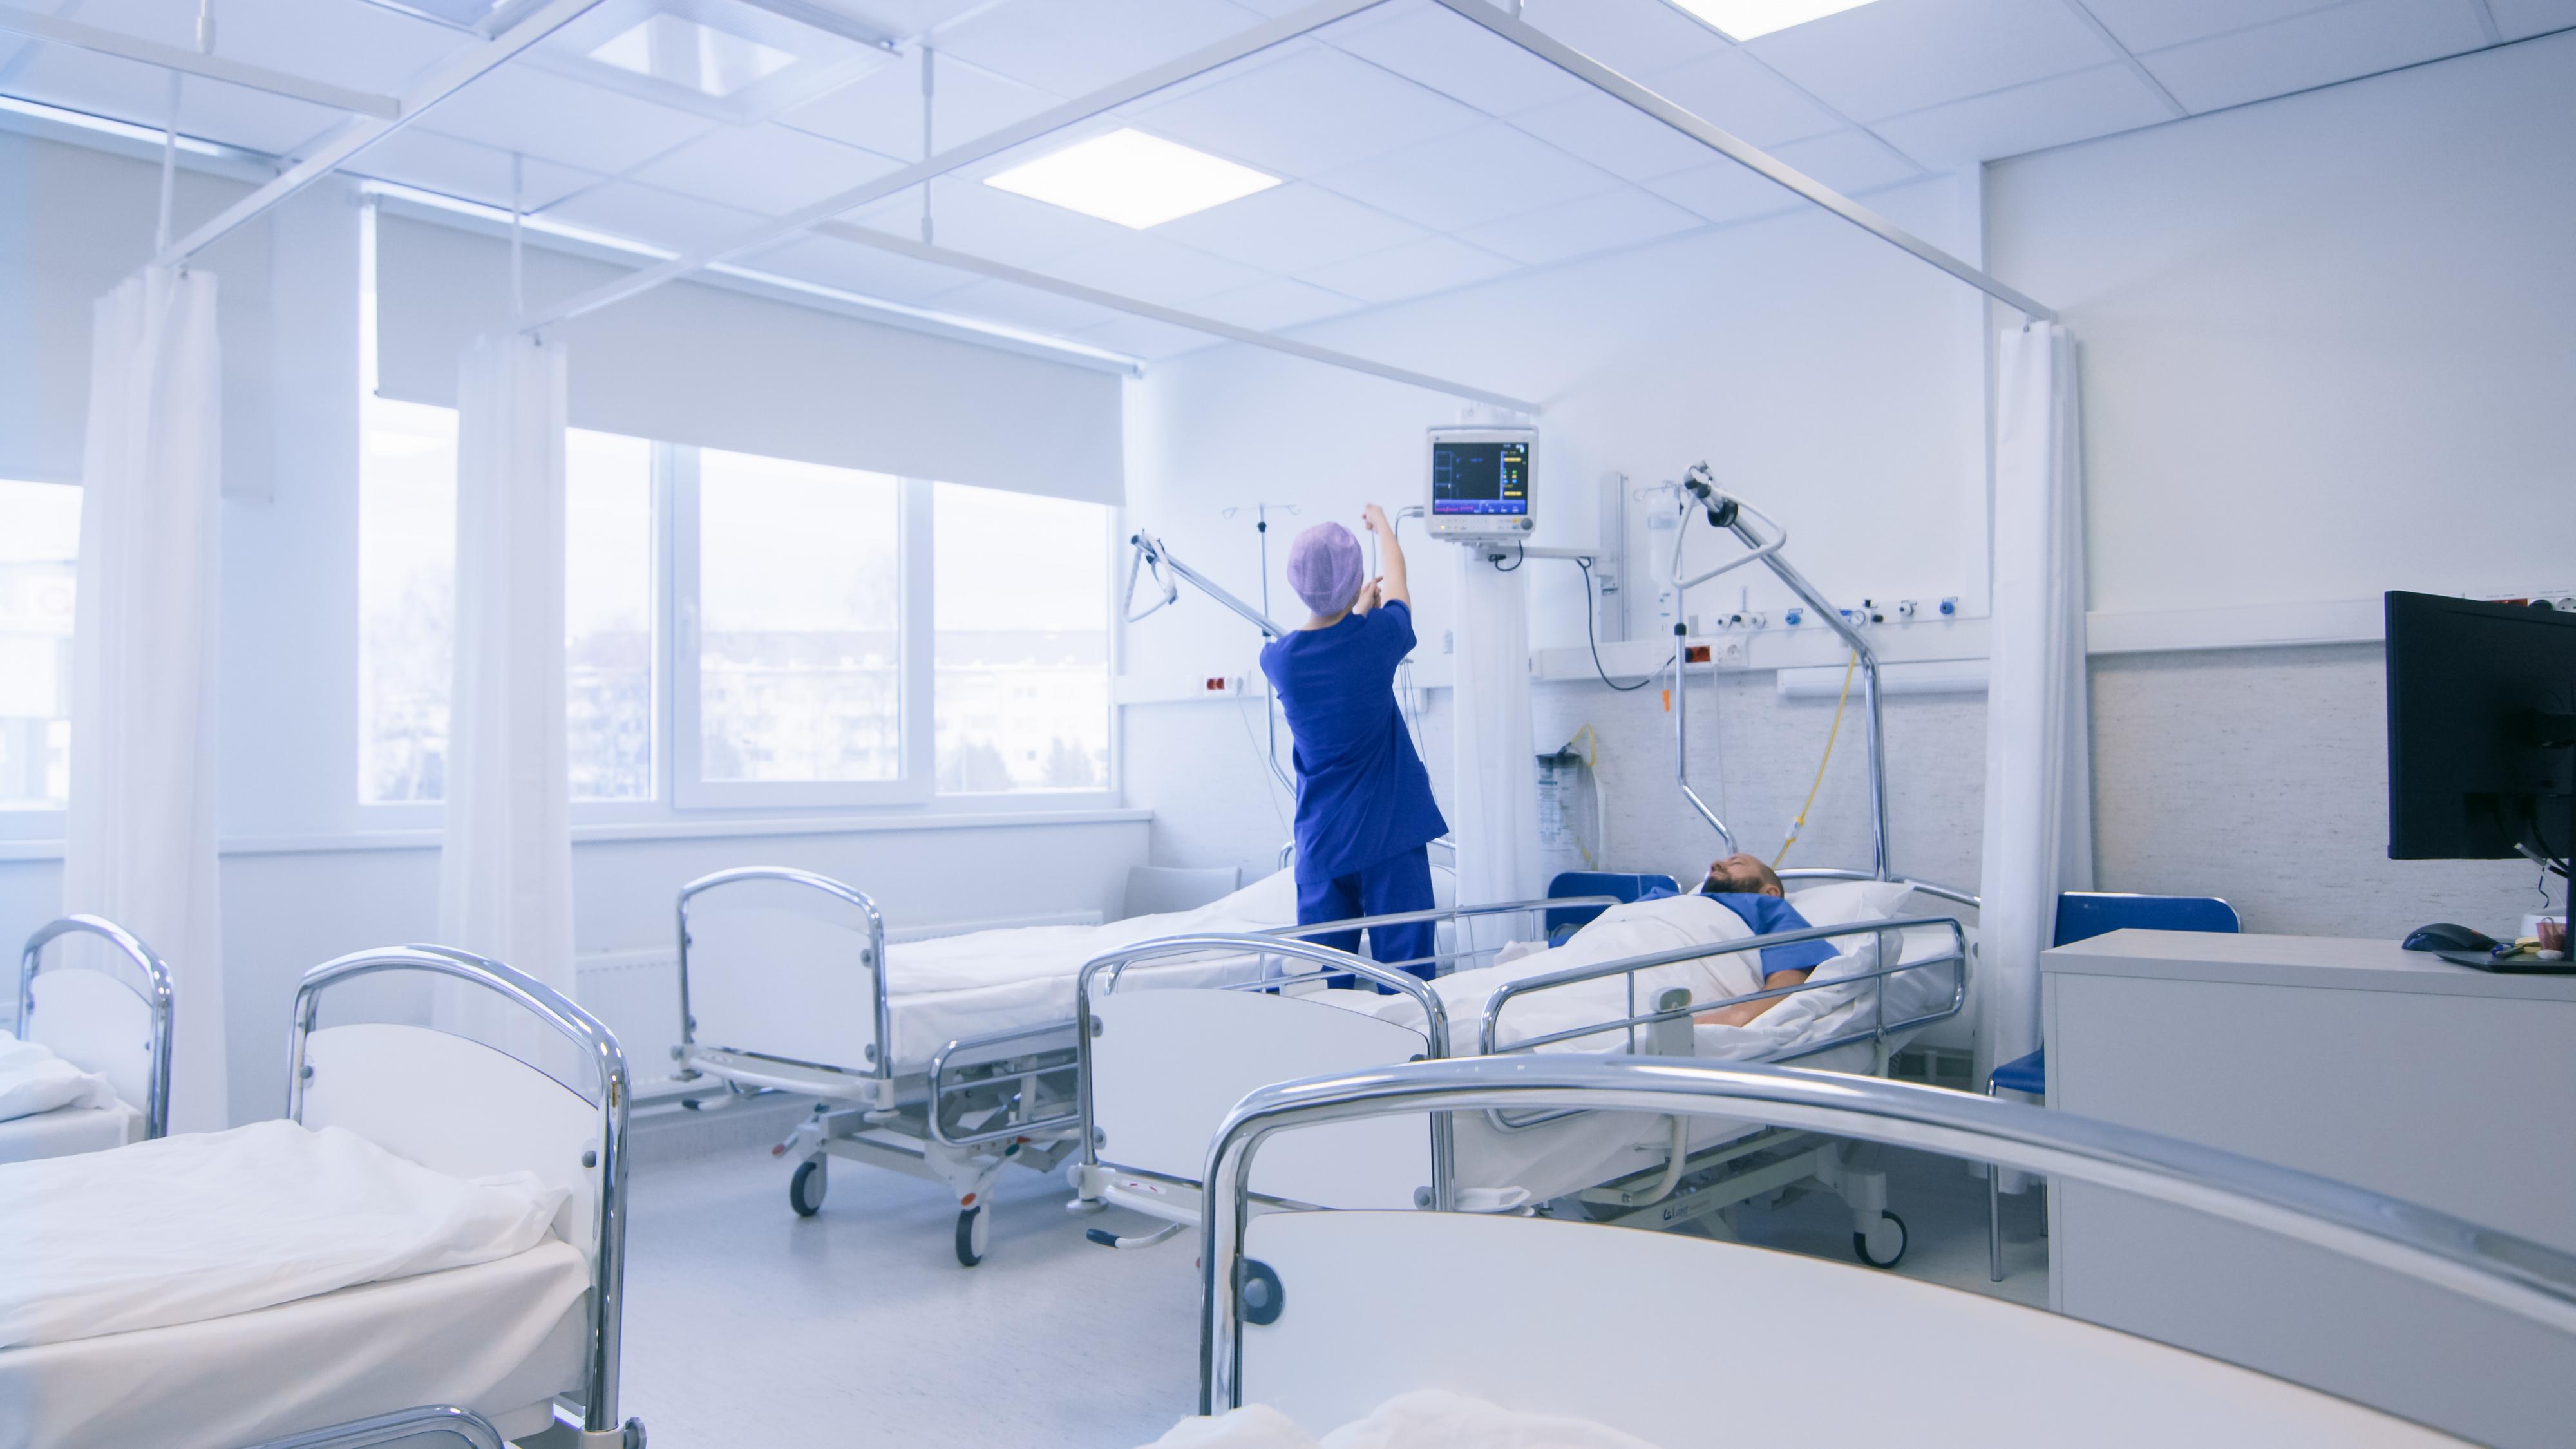 Human-centric lighting in healthcare facilities